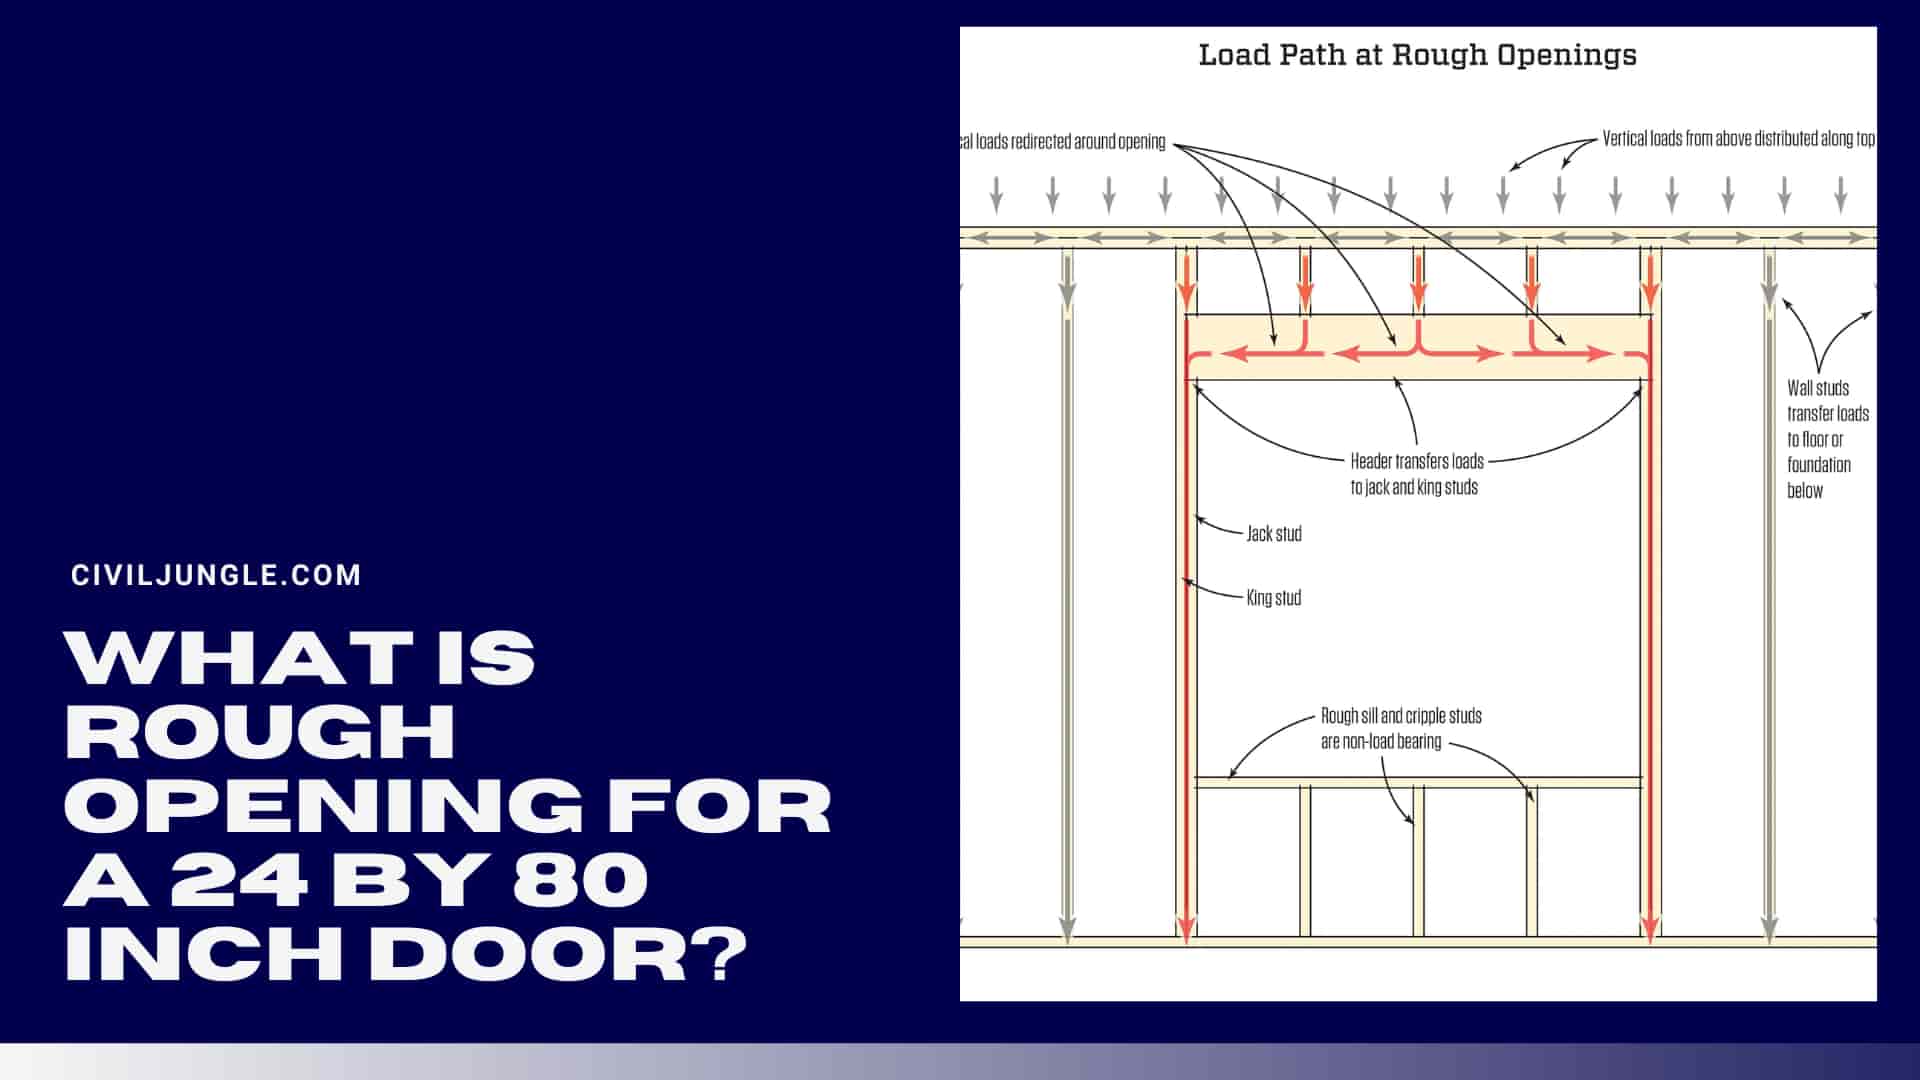 What Is Rough Opening for a 24 by 80 Inch Door?